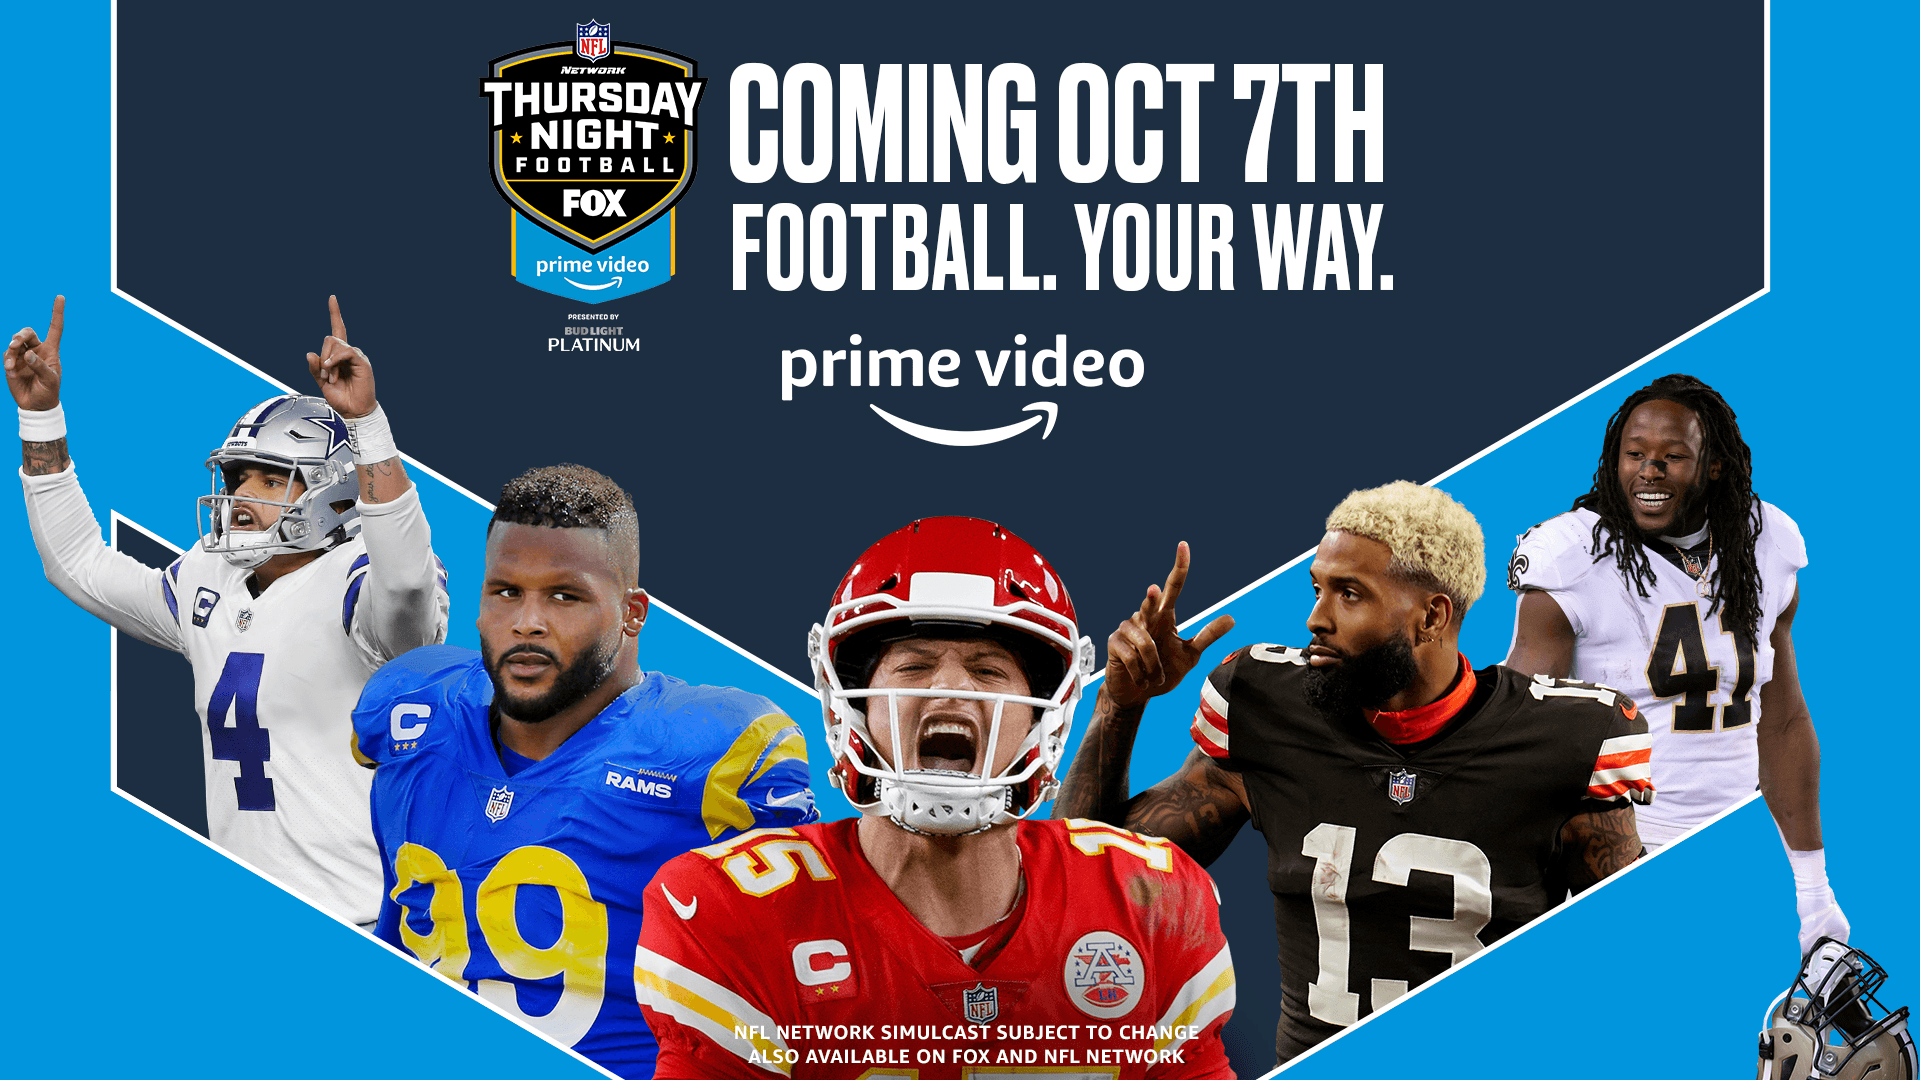 Amazon Prime Video Announces Upcoming NFL Thursday Night Football Programming Beginning This Week